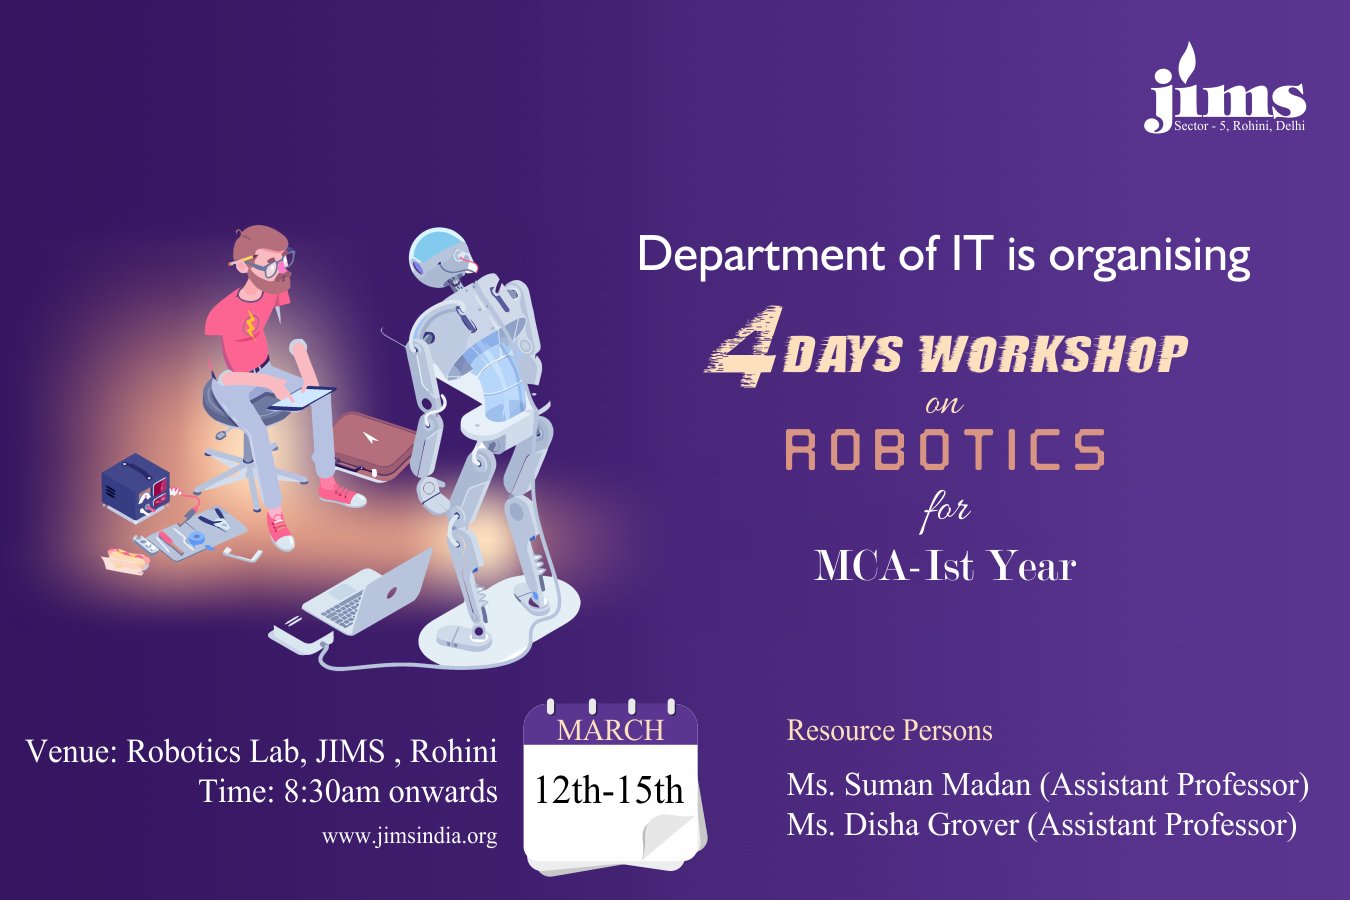 IT Department of JIMS Rohini is organizing 4 days workshop on Robotics for MCA-1st Year Students from 12th March to 15th March, 2019